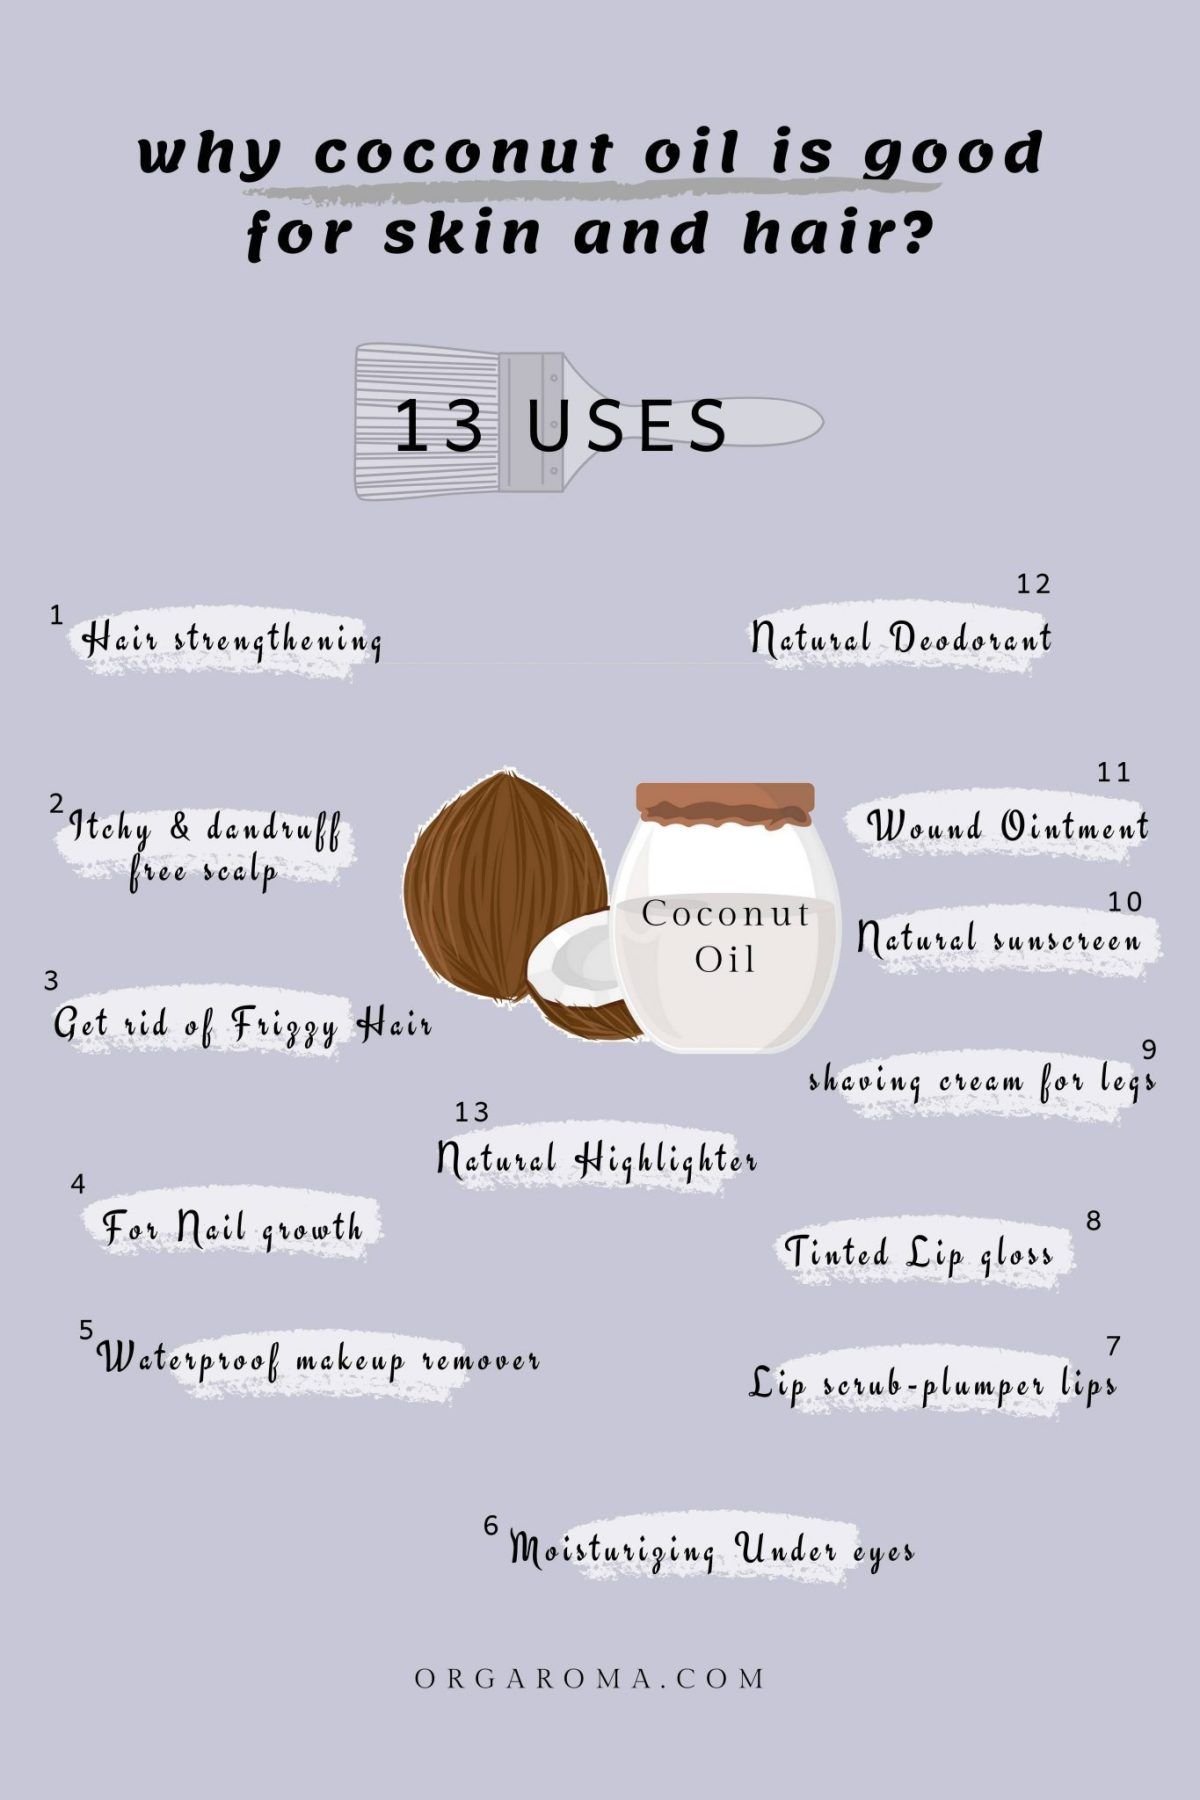 10 benefits of coconut oil for skin and hair health